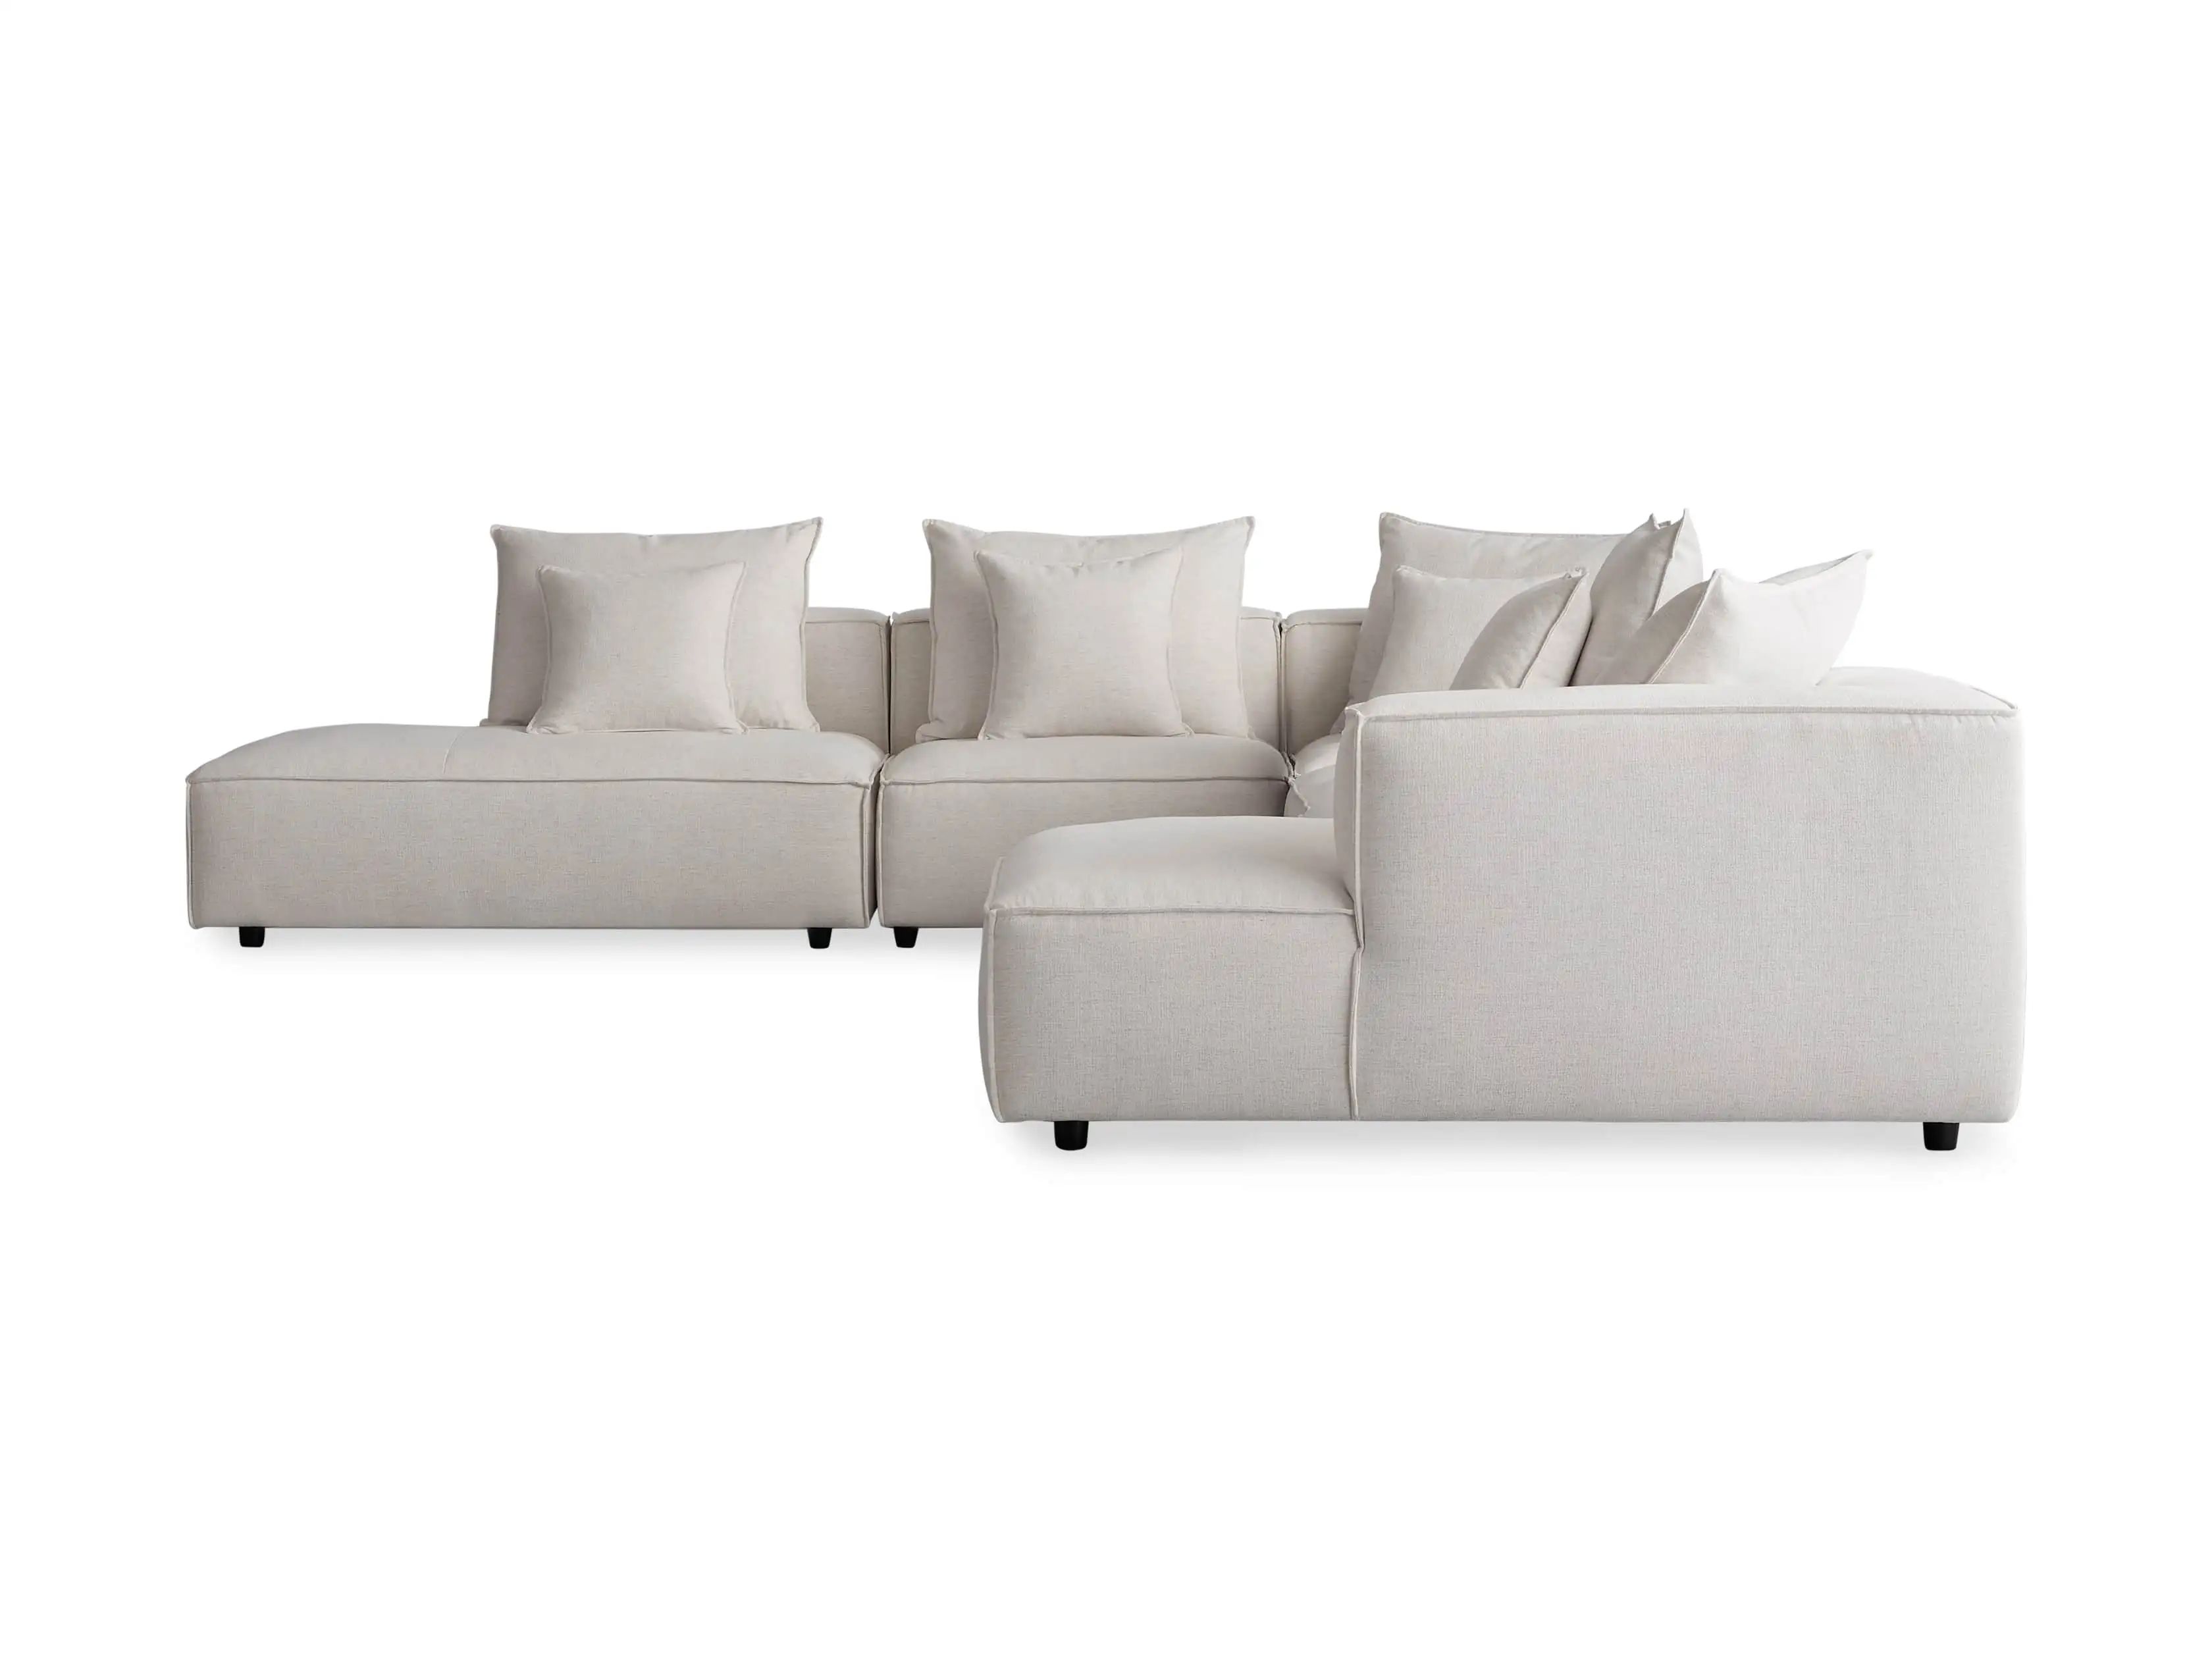 Coburn Six Piece Bumper Sectional with Chaise | Arhaus